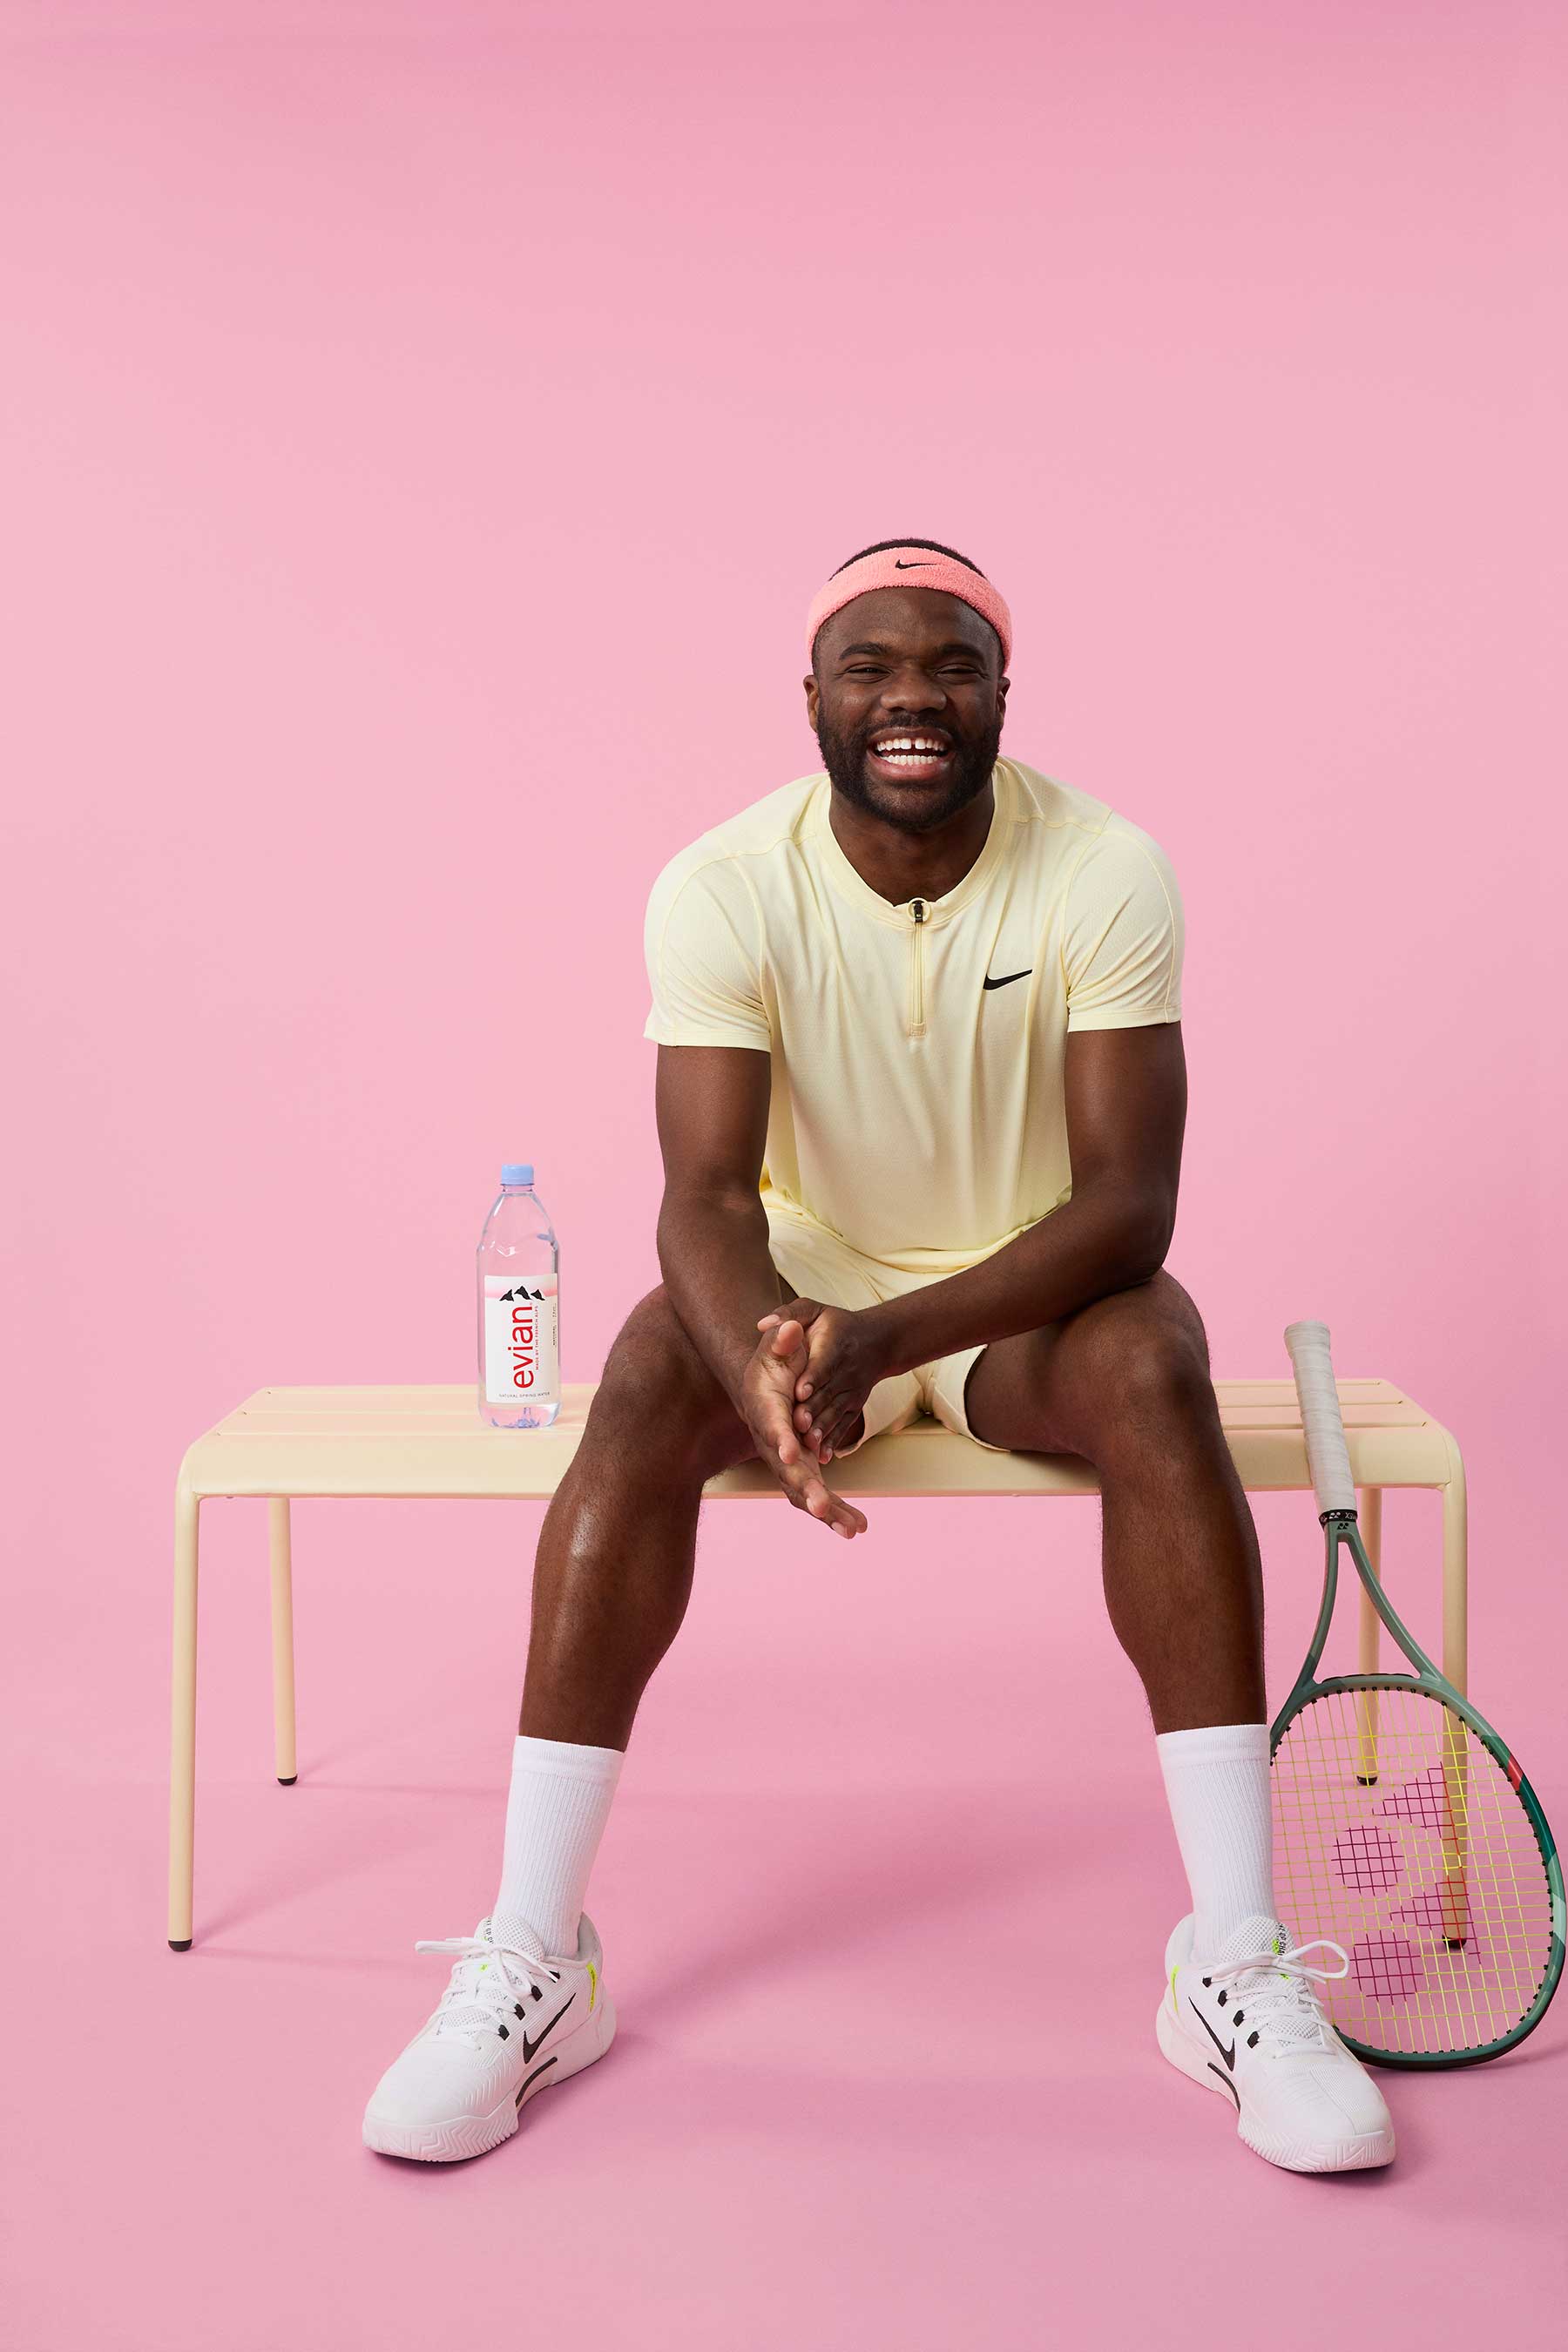 THE LEGACY CONTINUES: EVIAN ANNOUNCES WORLD-RENOWNED TENNIS STAR FRANCES TIAFOE AS ITS NEW GLOBAL BRAND AMBASSADOR